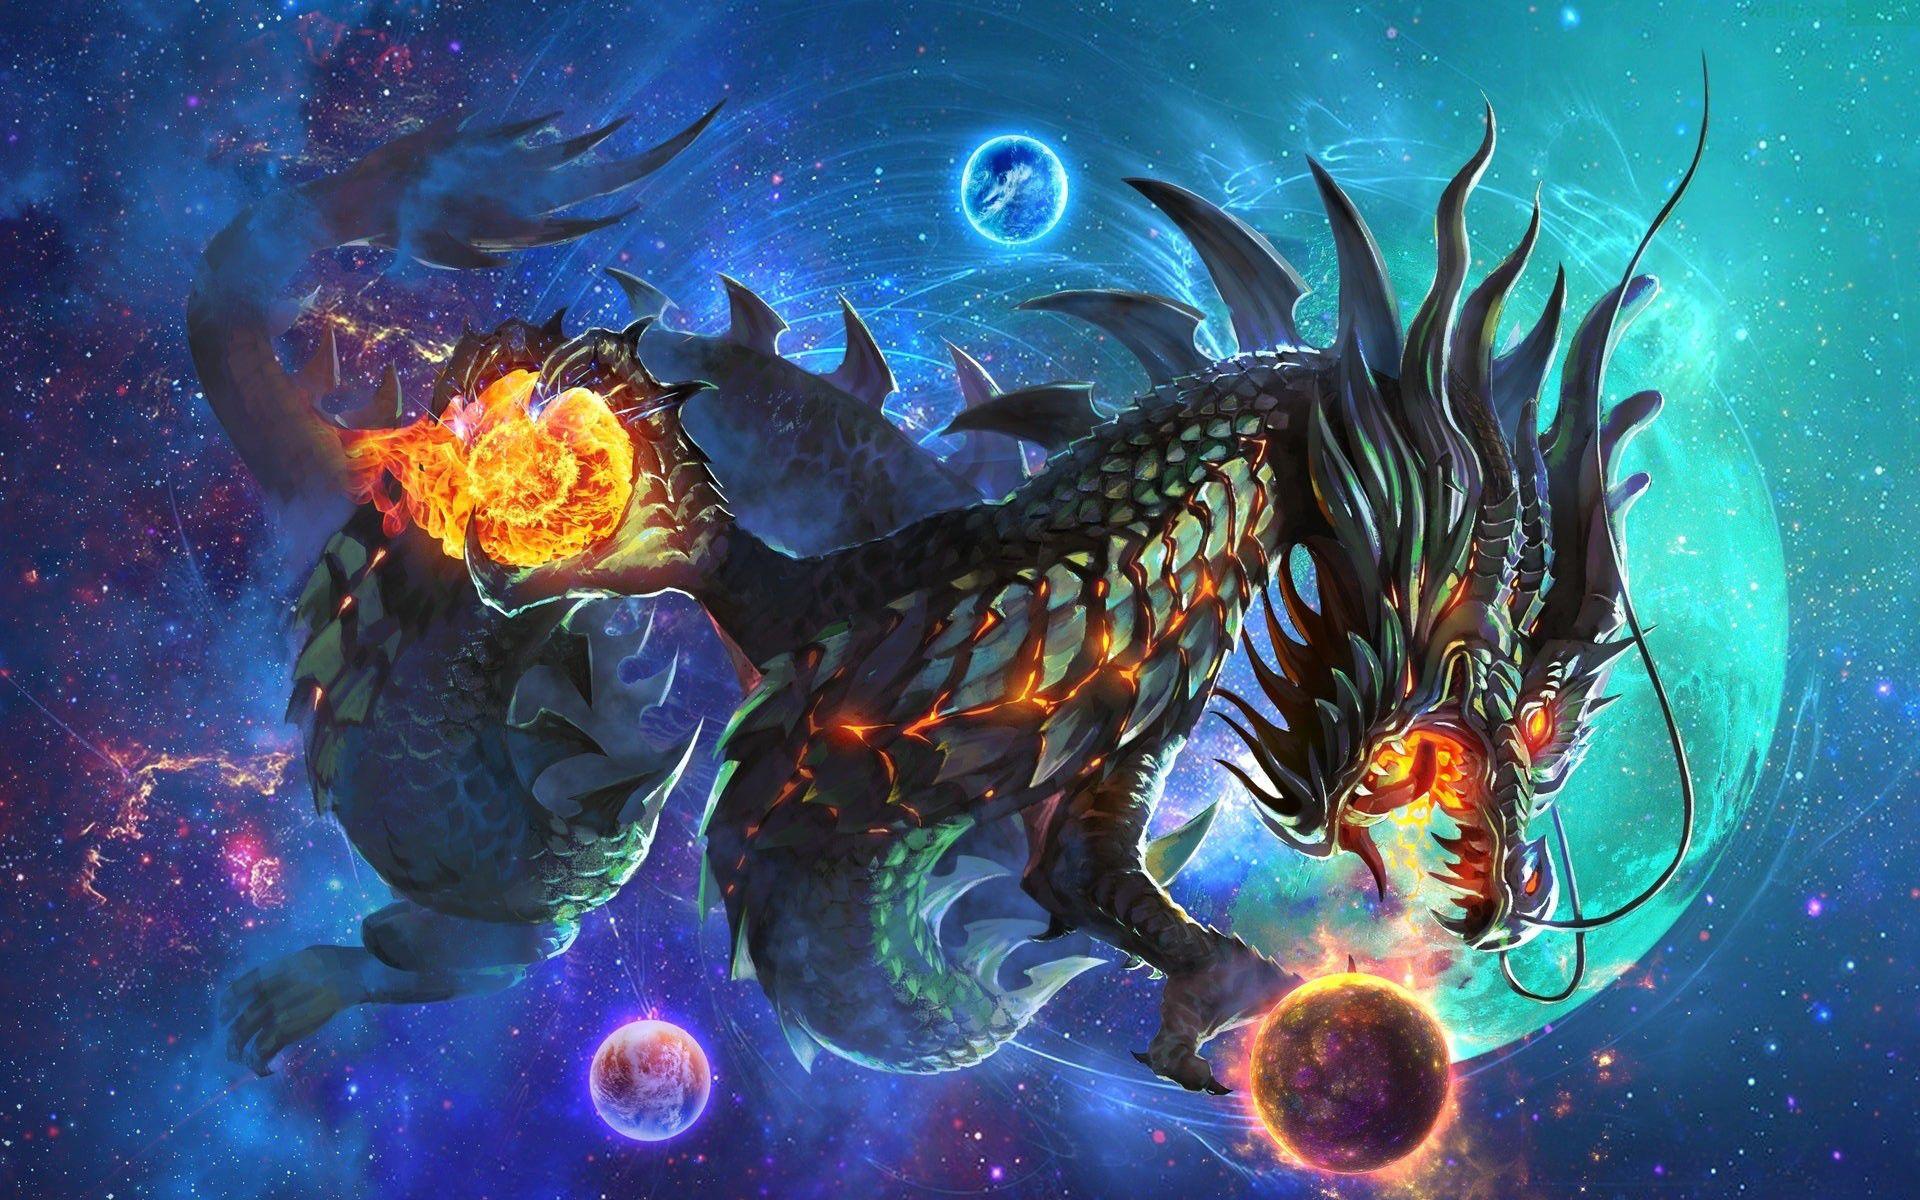 Beautiful Mystical Dragon Images Wallpapers